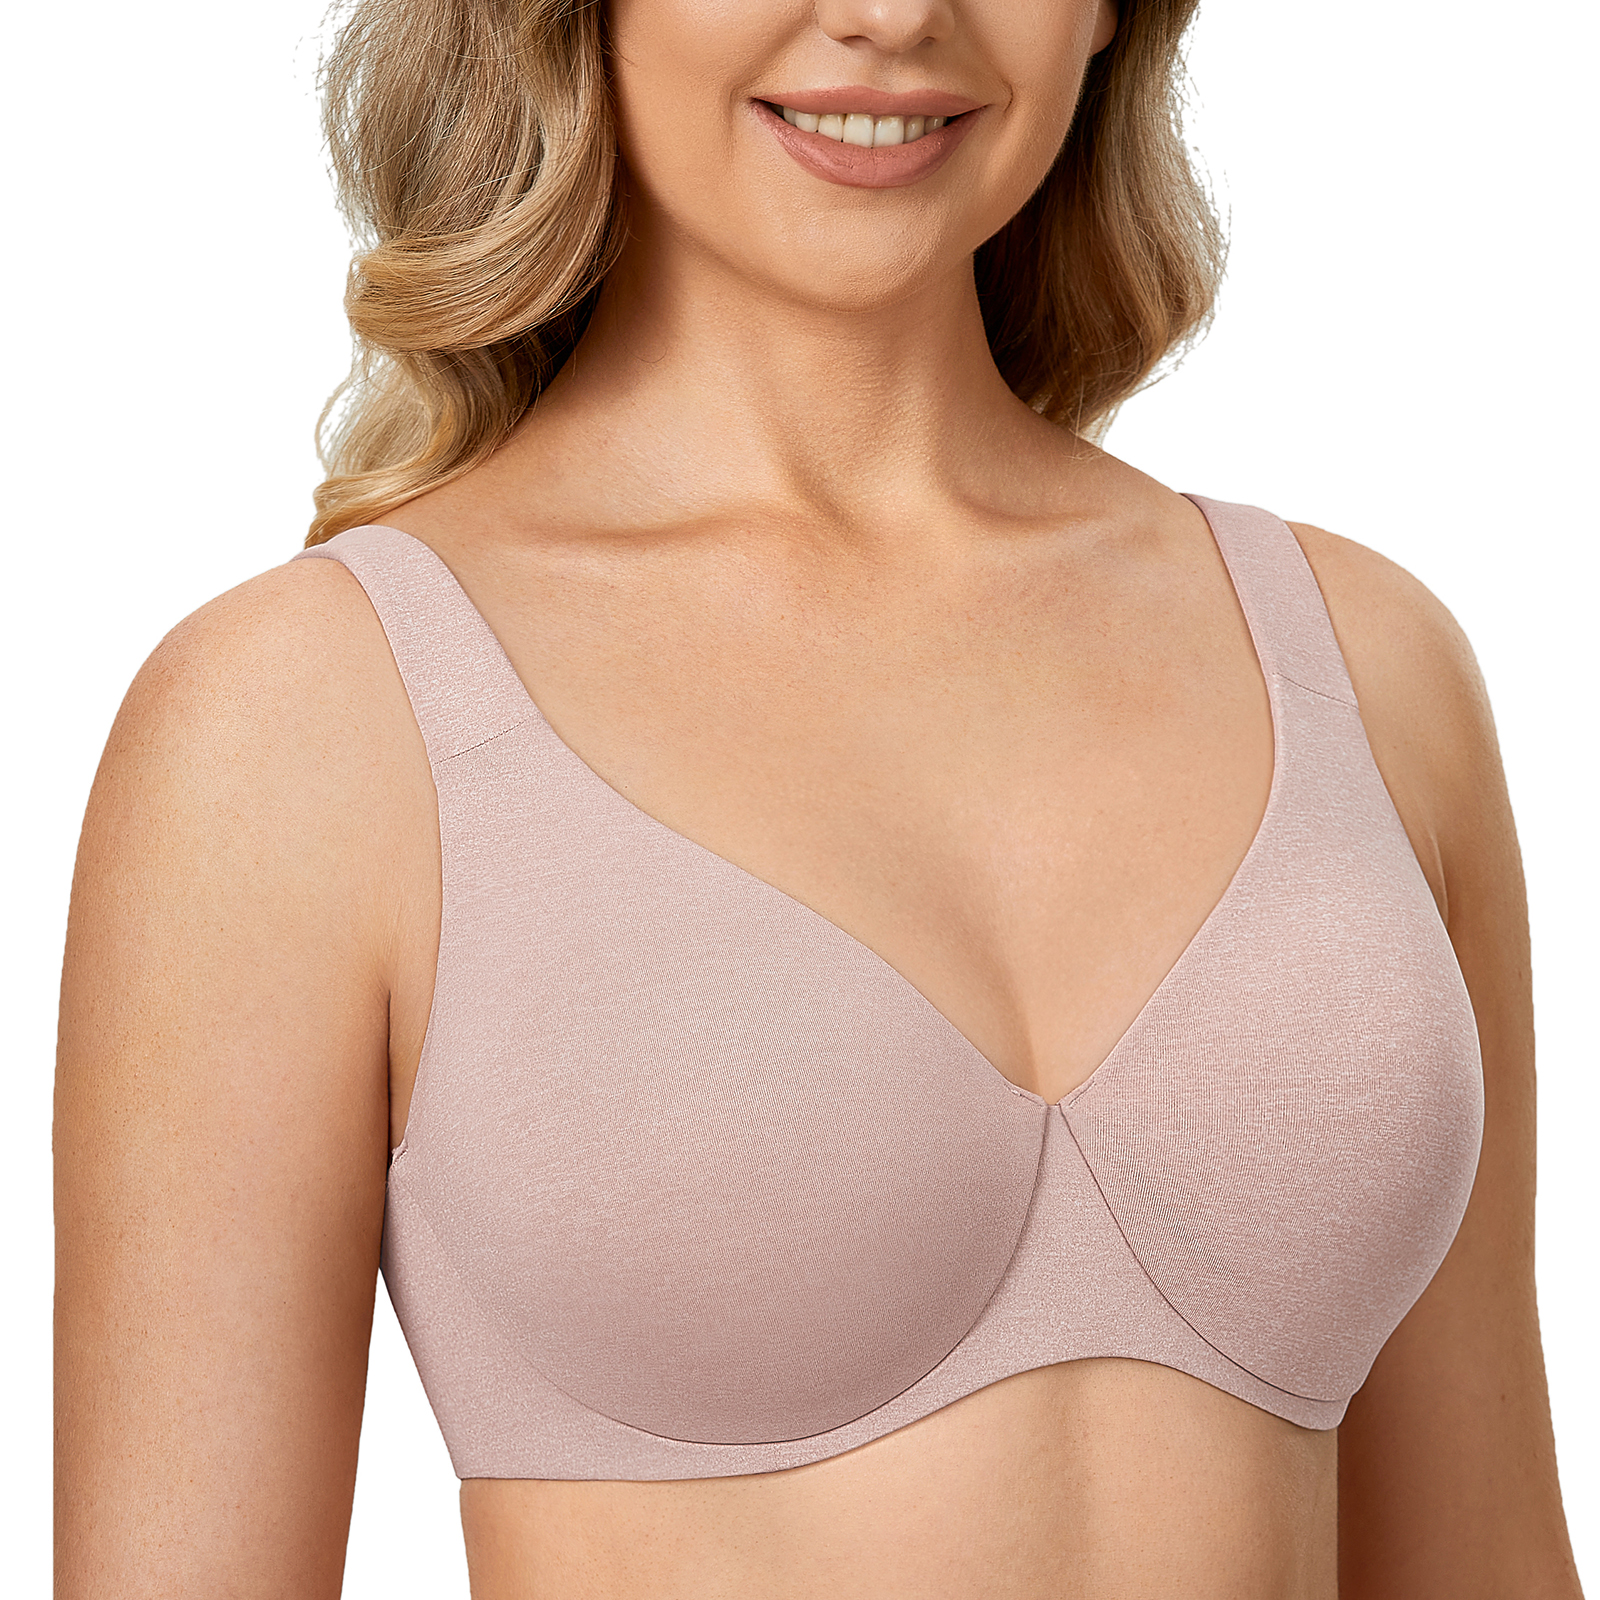 Women's Seamless Minimizer Bra Full Coverage Underwire Unlined Cup